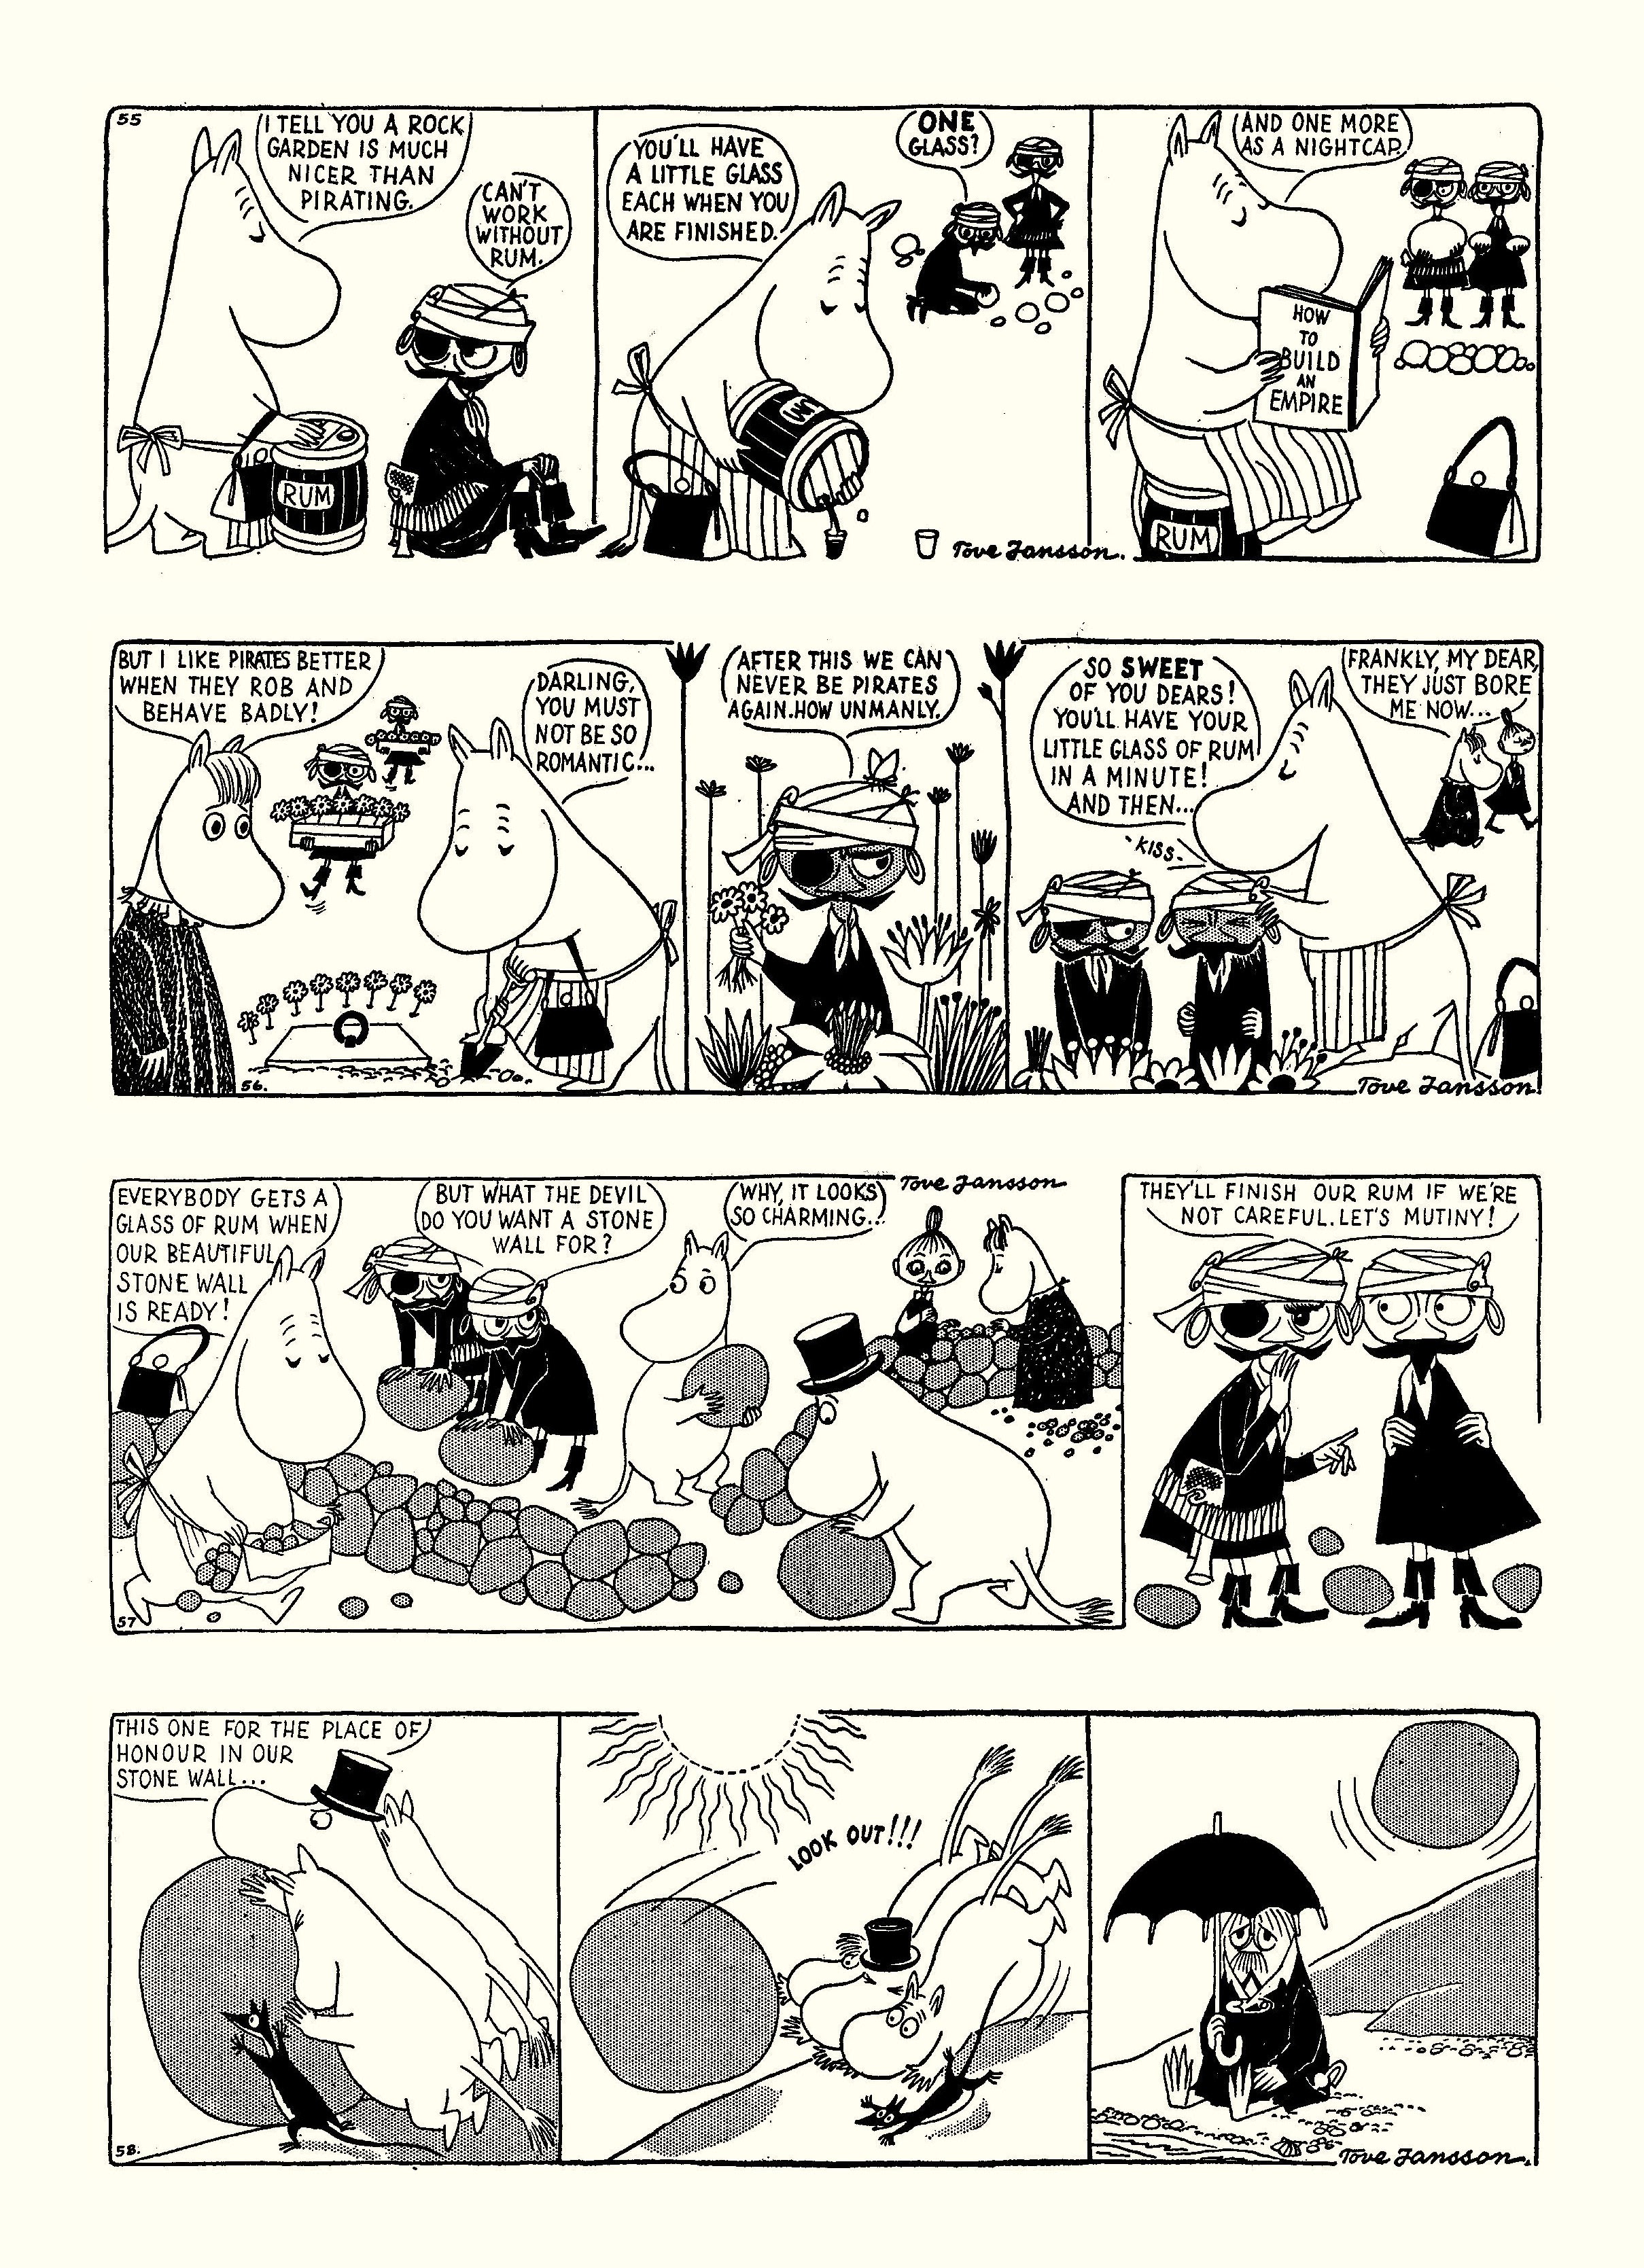 Read online Moomin: The Complete Tove Jansson Comic Strip comic -  Issue # TPB 1 - 84